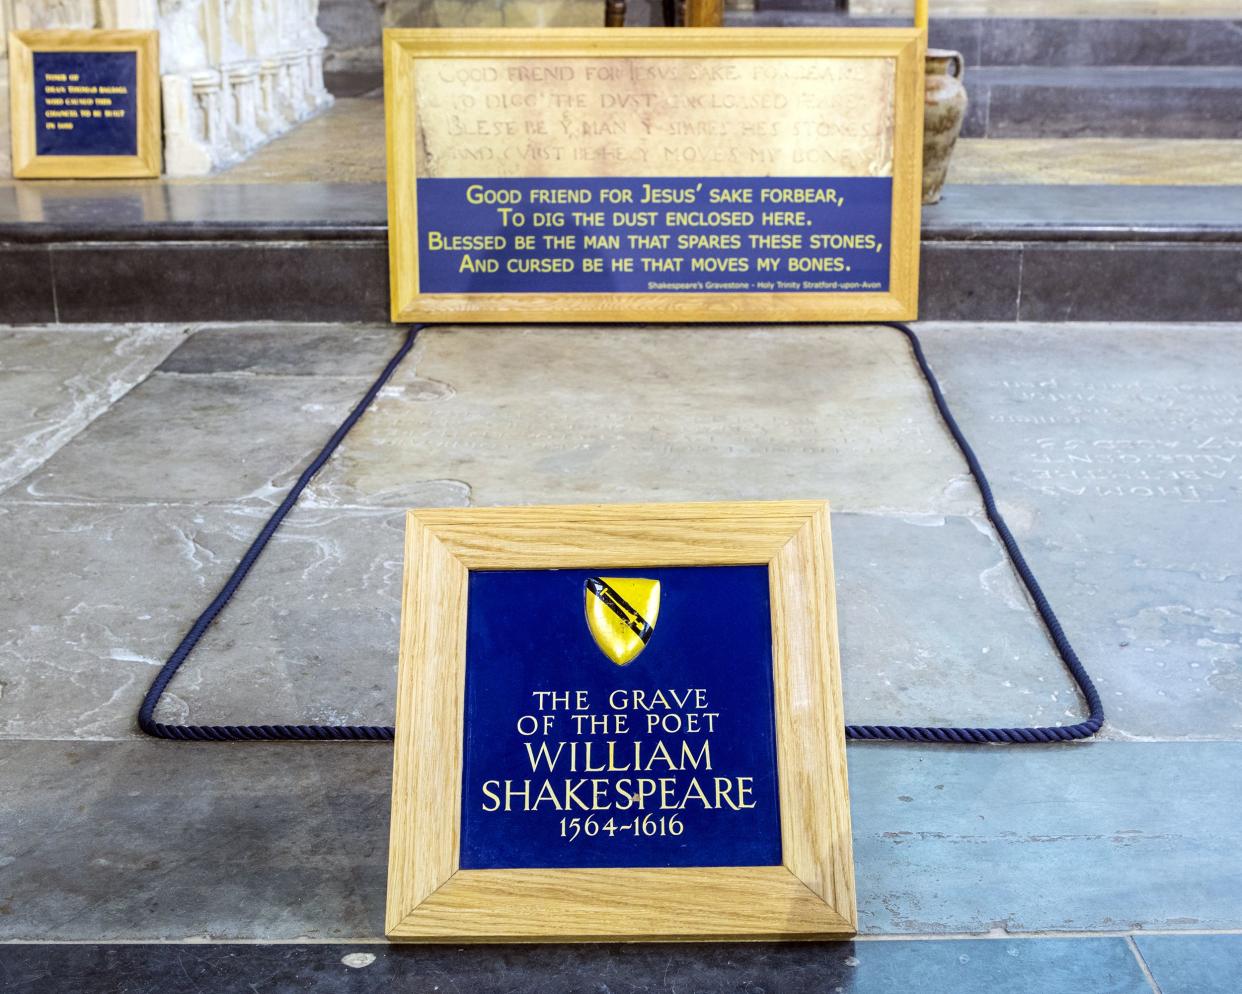 William Shakespeare's simple stone grave in the Holy Trinity Church, Stratford-upon-Avon, England, a sign in a frame in the place of a headstone, with other such graves and an urn in the background